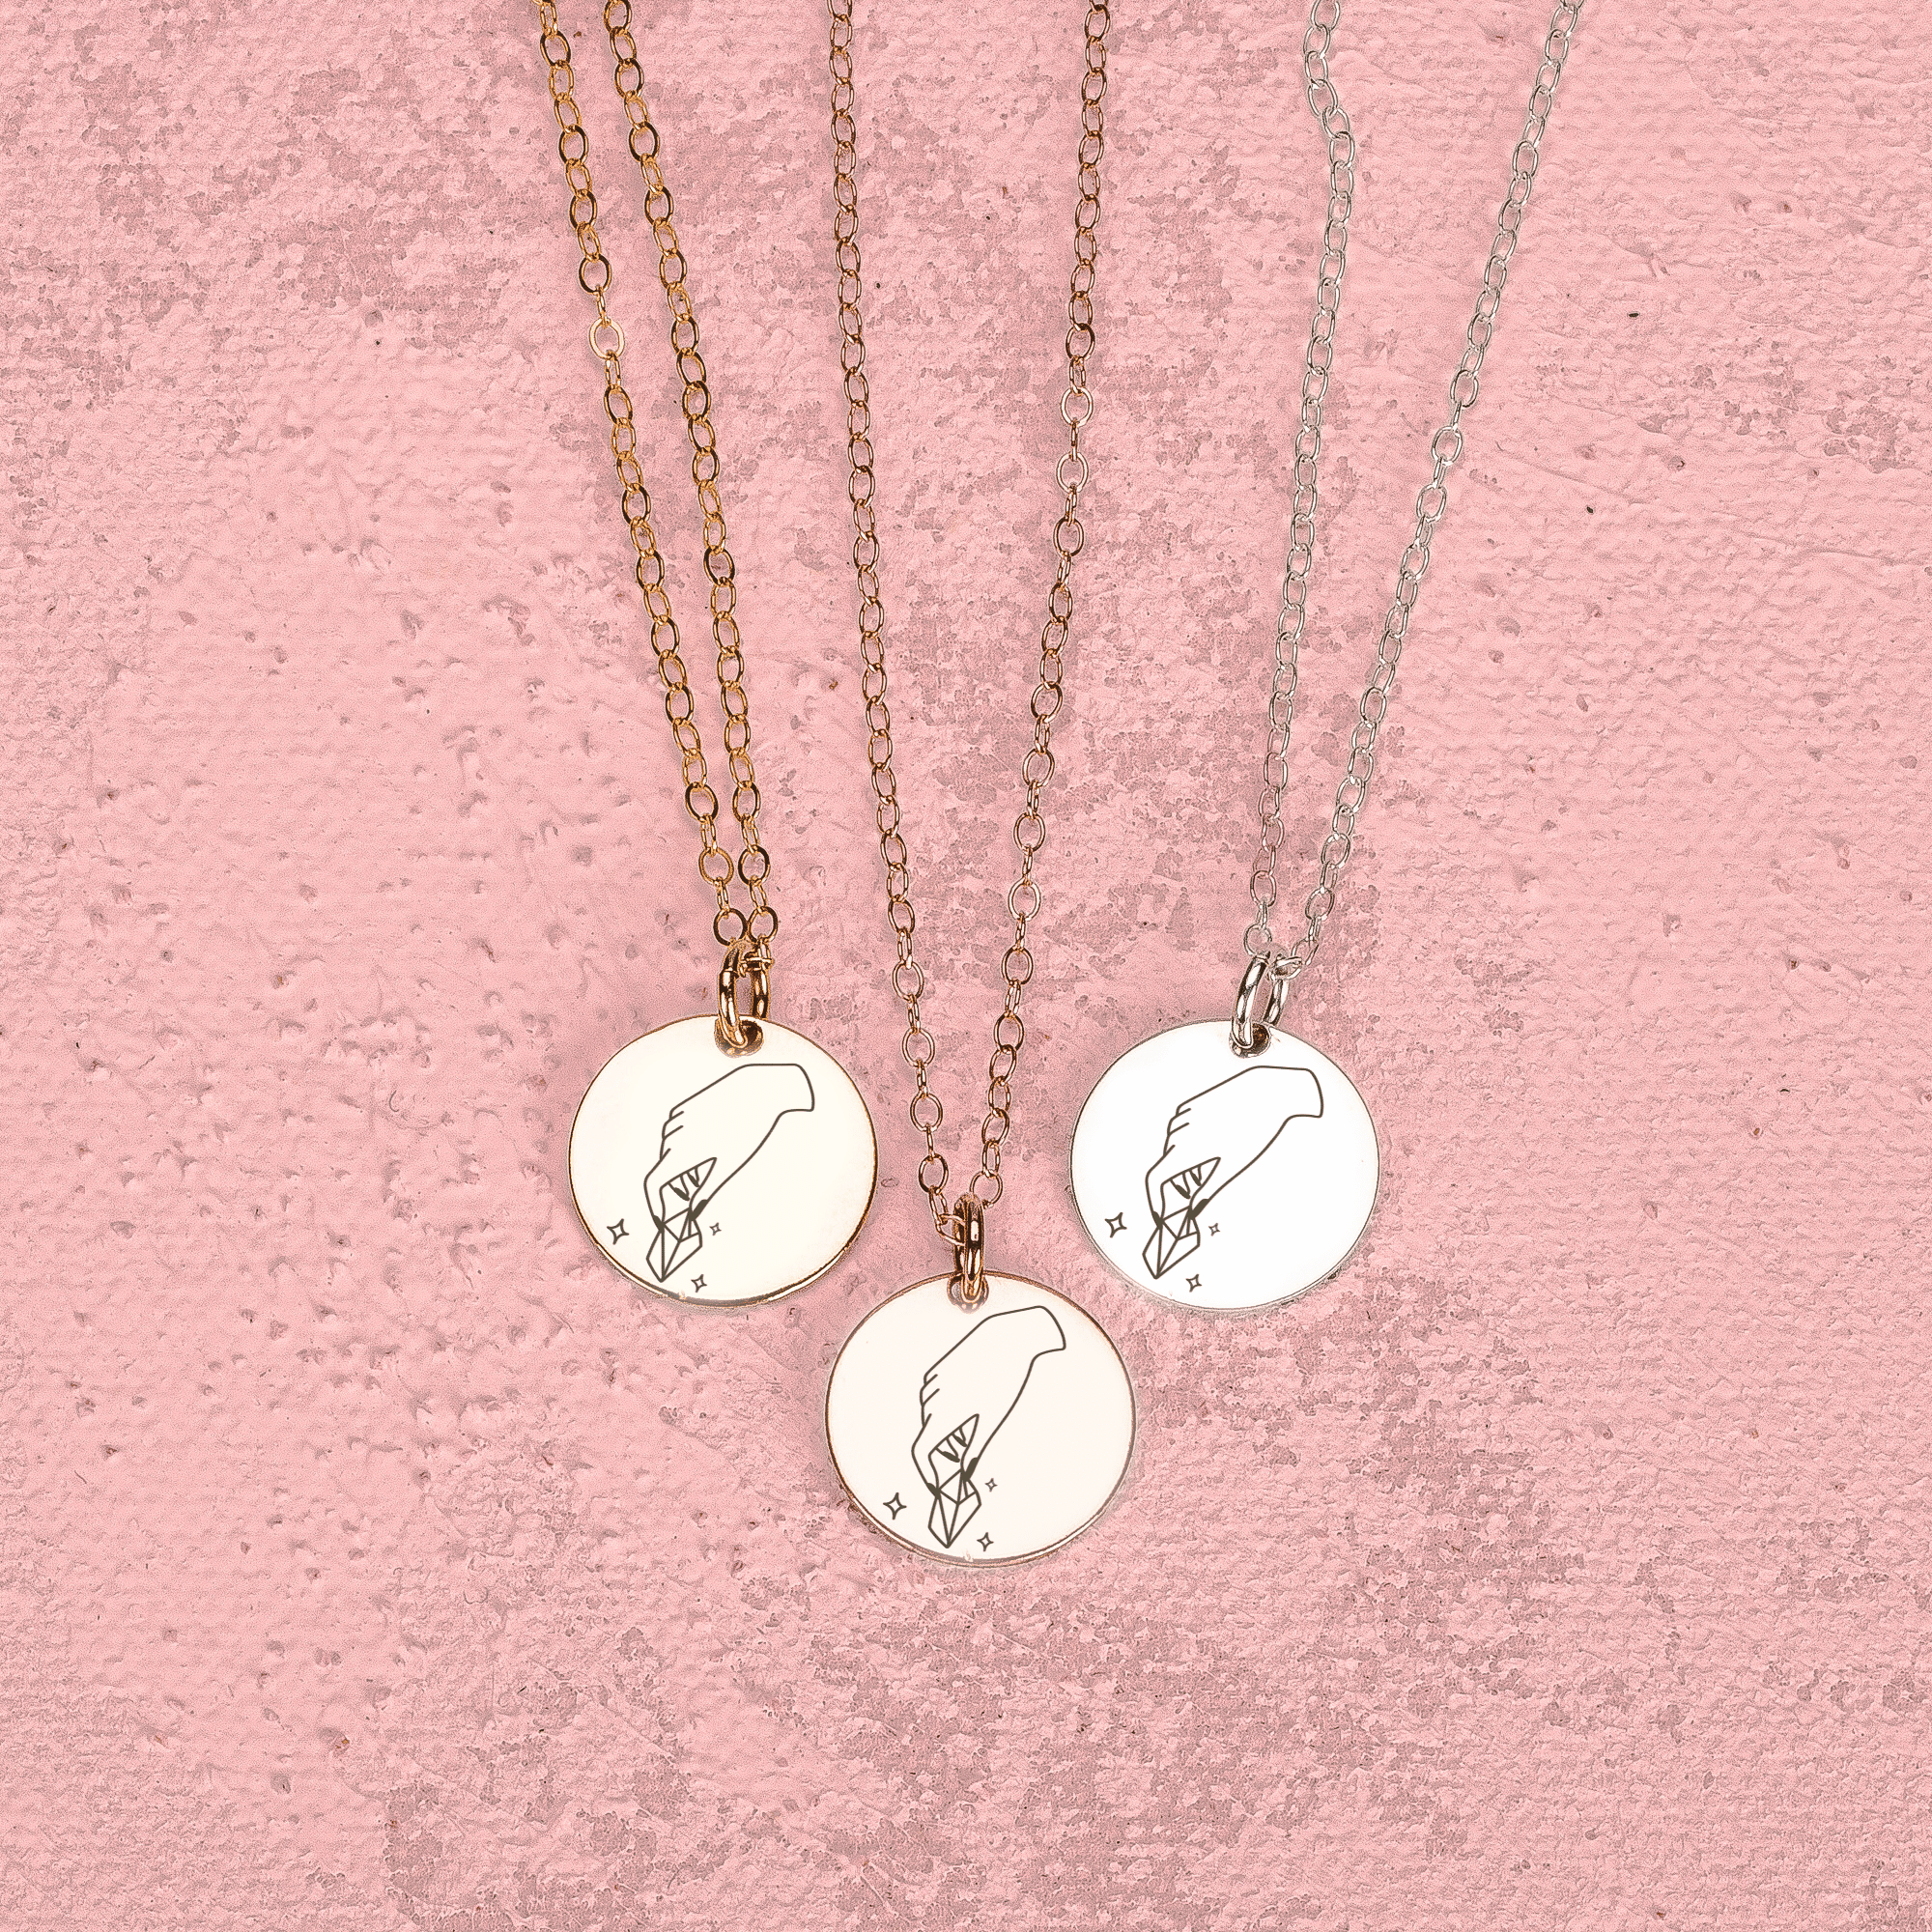 Keep Calm and Hold A Crystal Necklace - Melanie Golden Jewelry - disc necklaces, Engraved Jewelry, minimal minimal necklace, minimal necklace, mystic, necklace, necklaces, symbolic